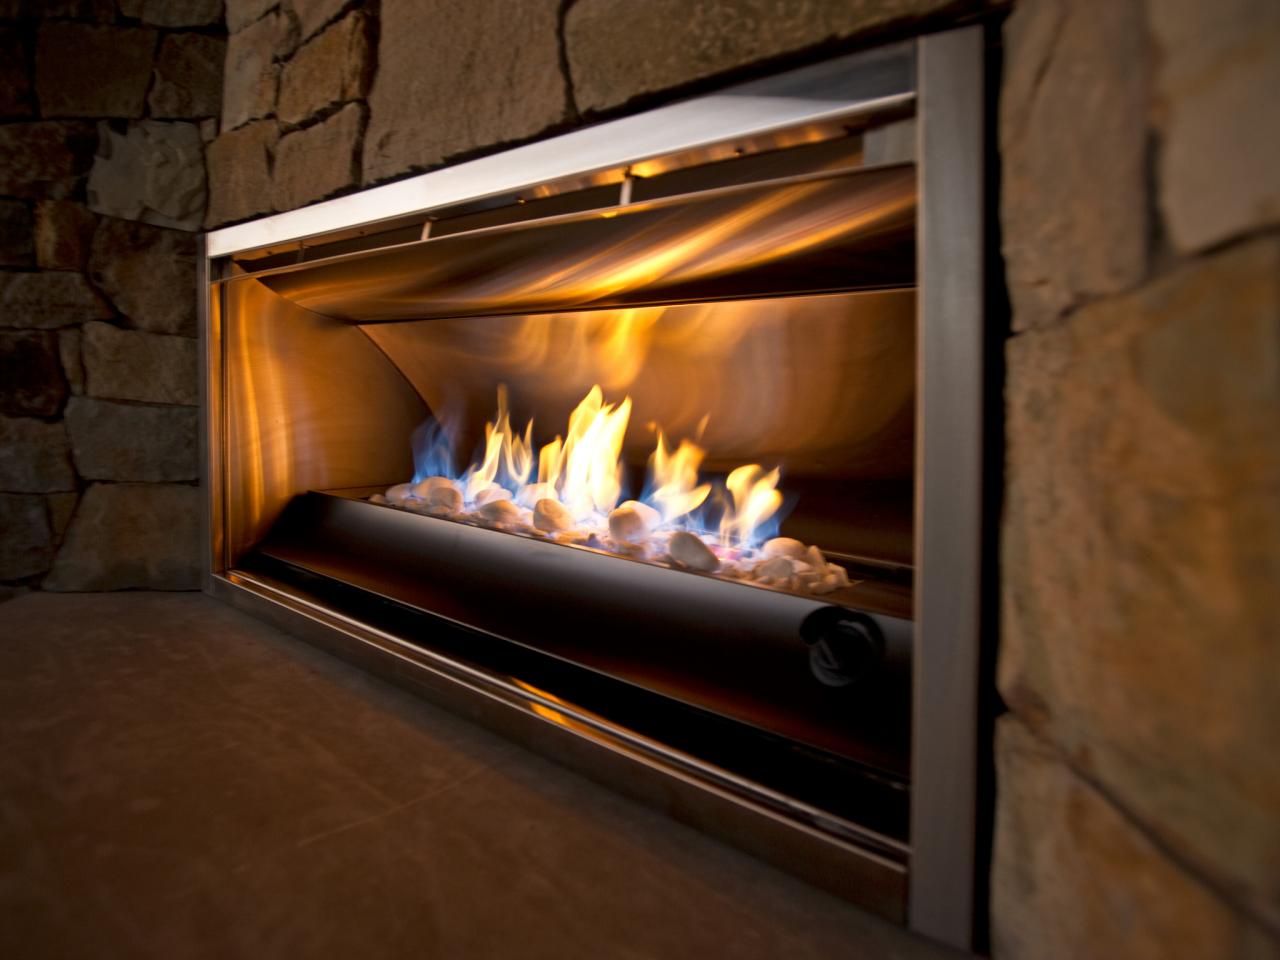 Outdoor Gas Fireplace Options And Ideas, How To Turn On Outdoor Gas Fireplace